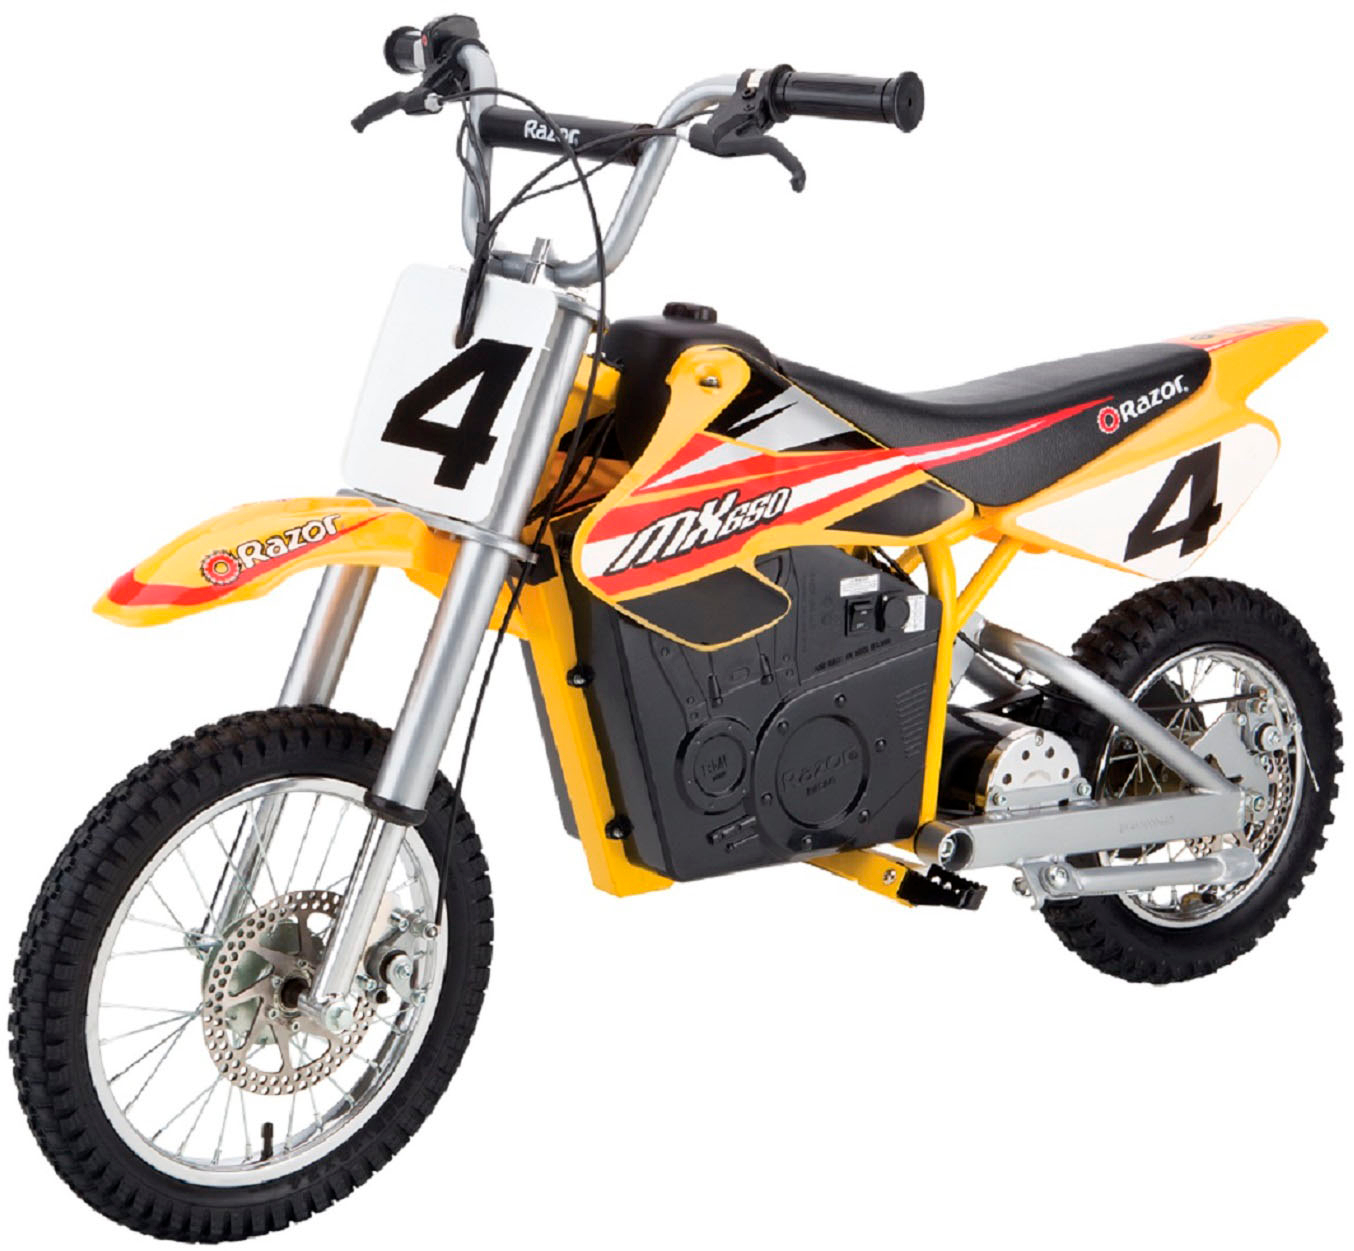 10. Deals and Discounts for Kids Dirt Bikes